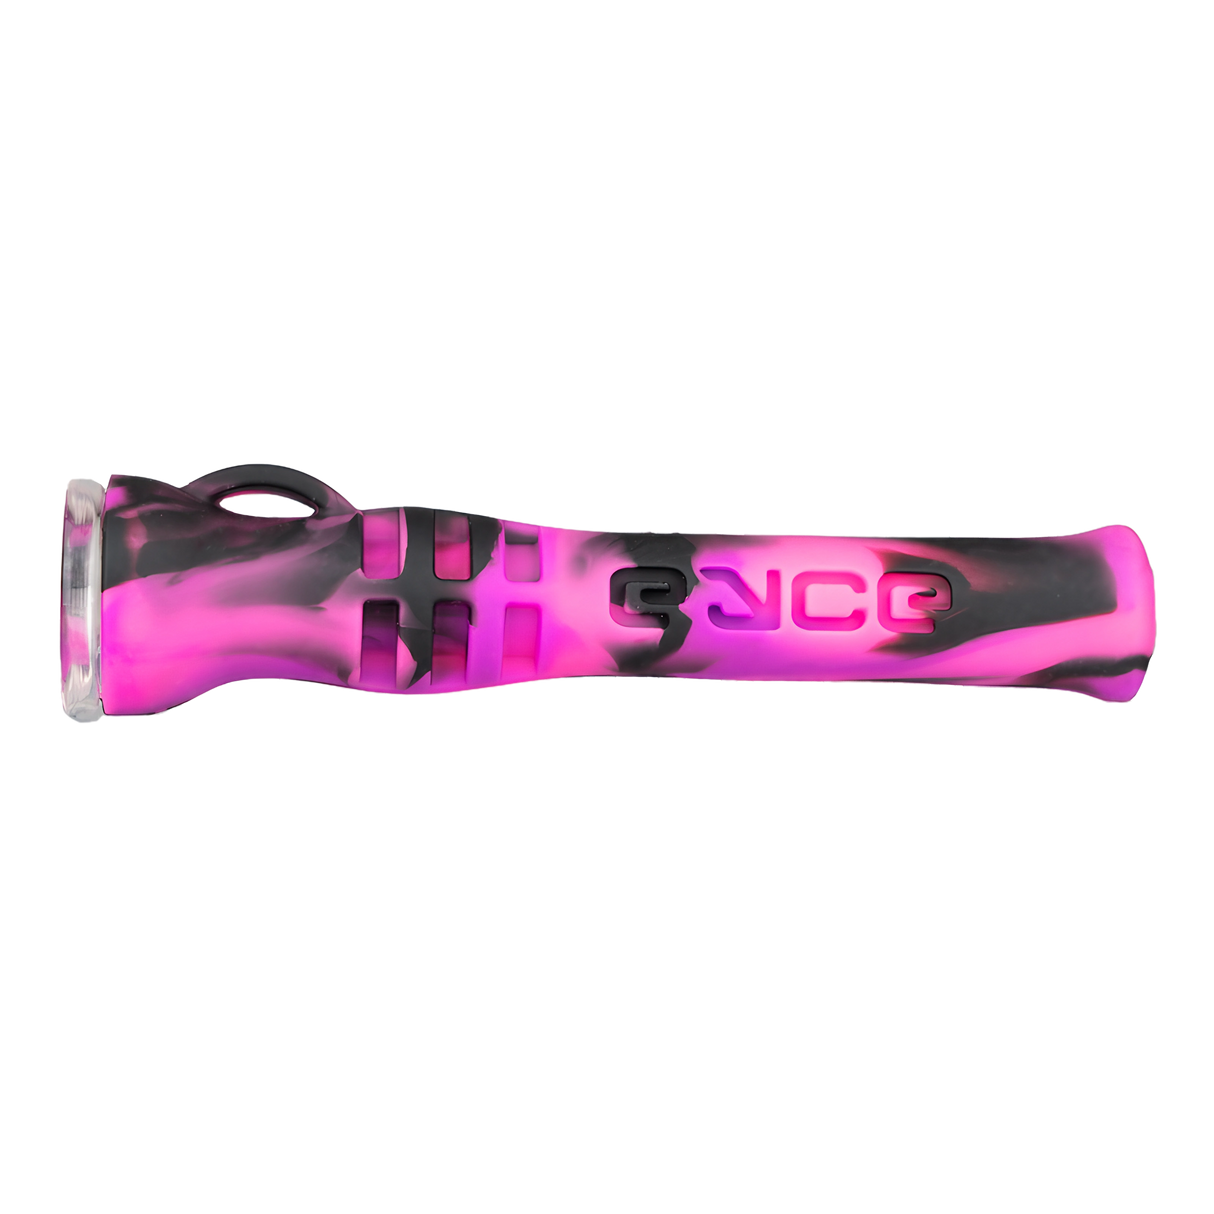 EYCE Shorty hand pipe in Bangin Pink/Black, durable silicone, portable size, front view